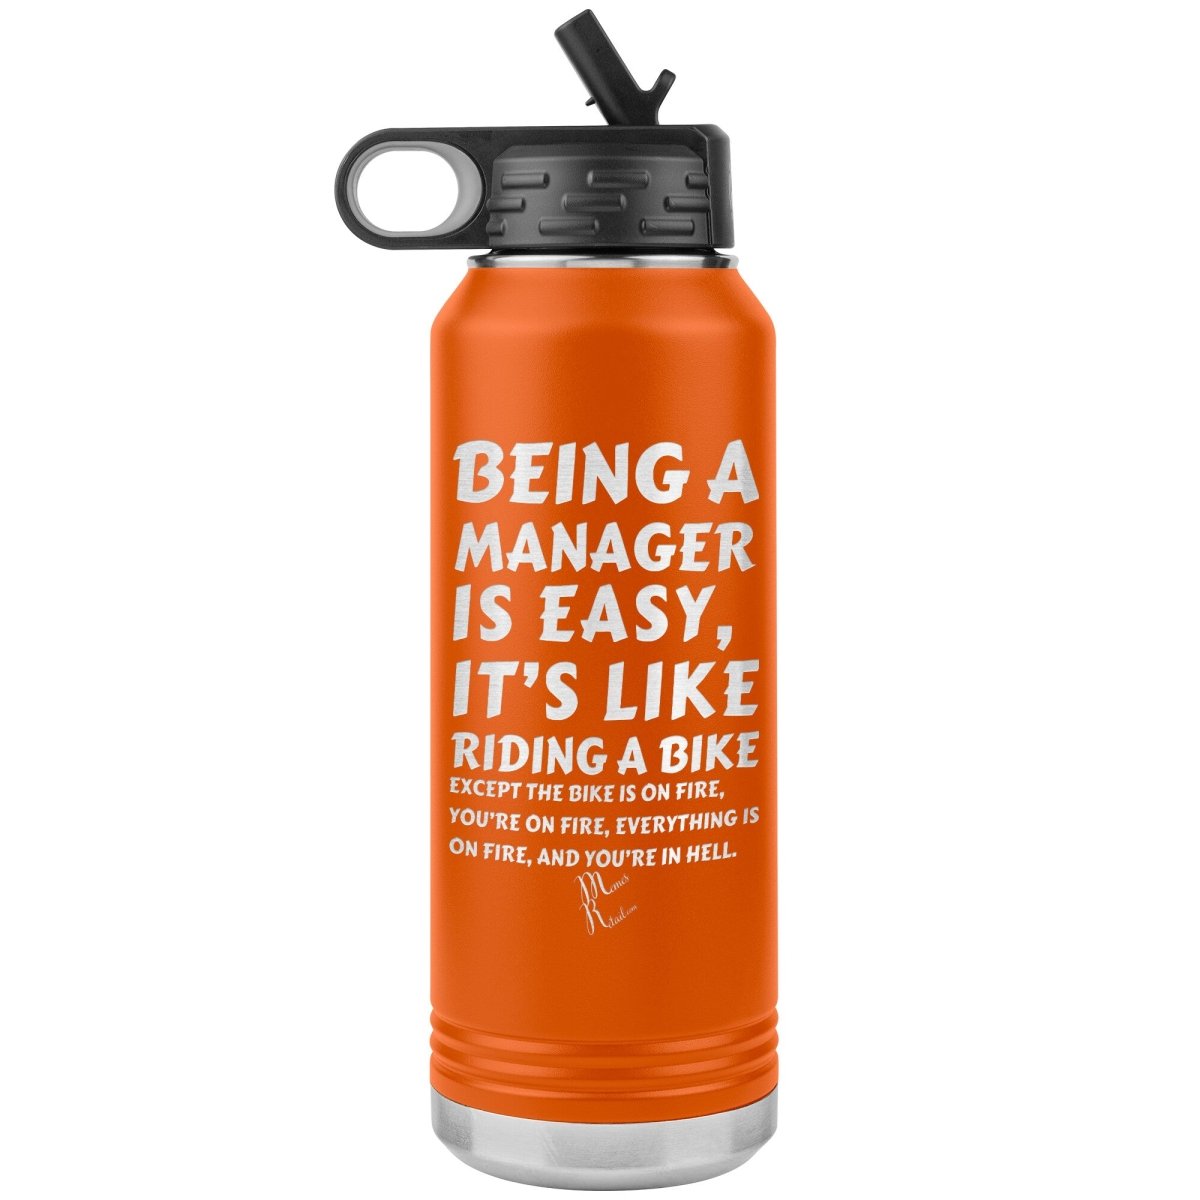 Being a manager is easy….32oz Water Tumbler, Orange - MemesRetail.com